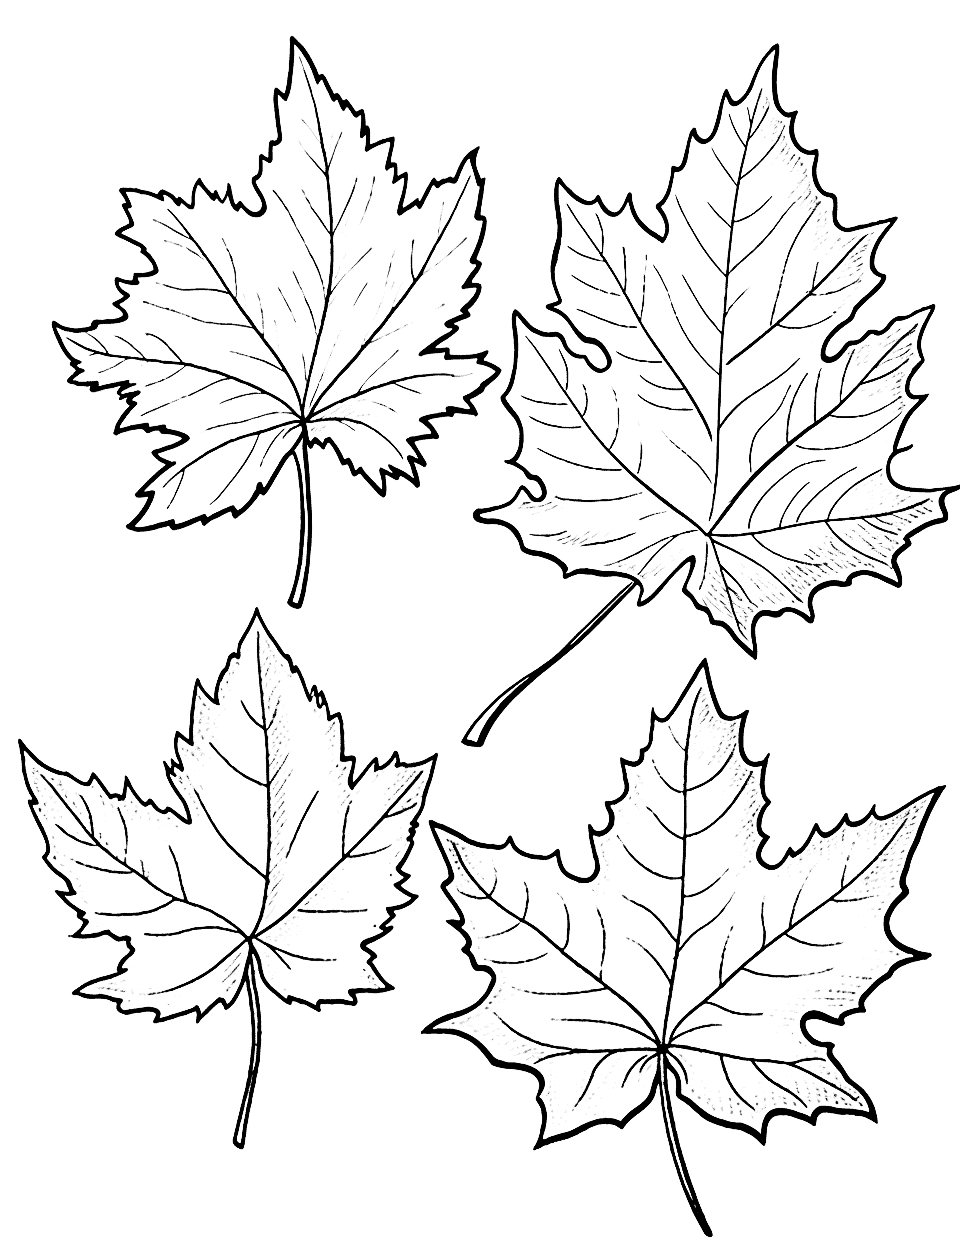 Intricate Fall Leaves Thanksgiving Coloring Page - Detailed fall leaf patterns for children to color.